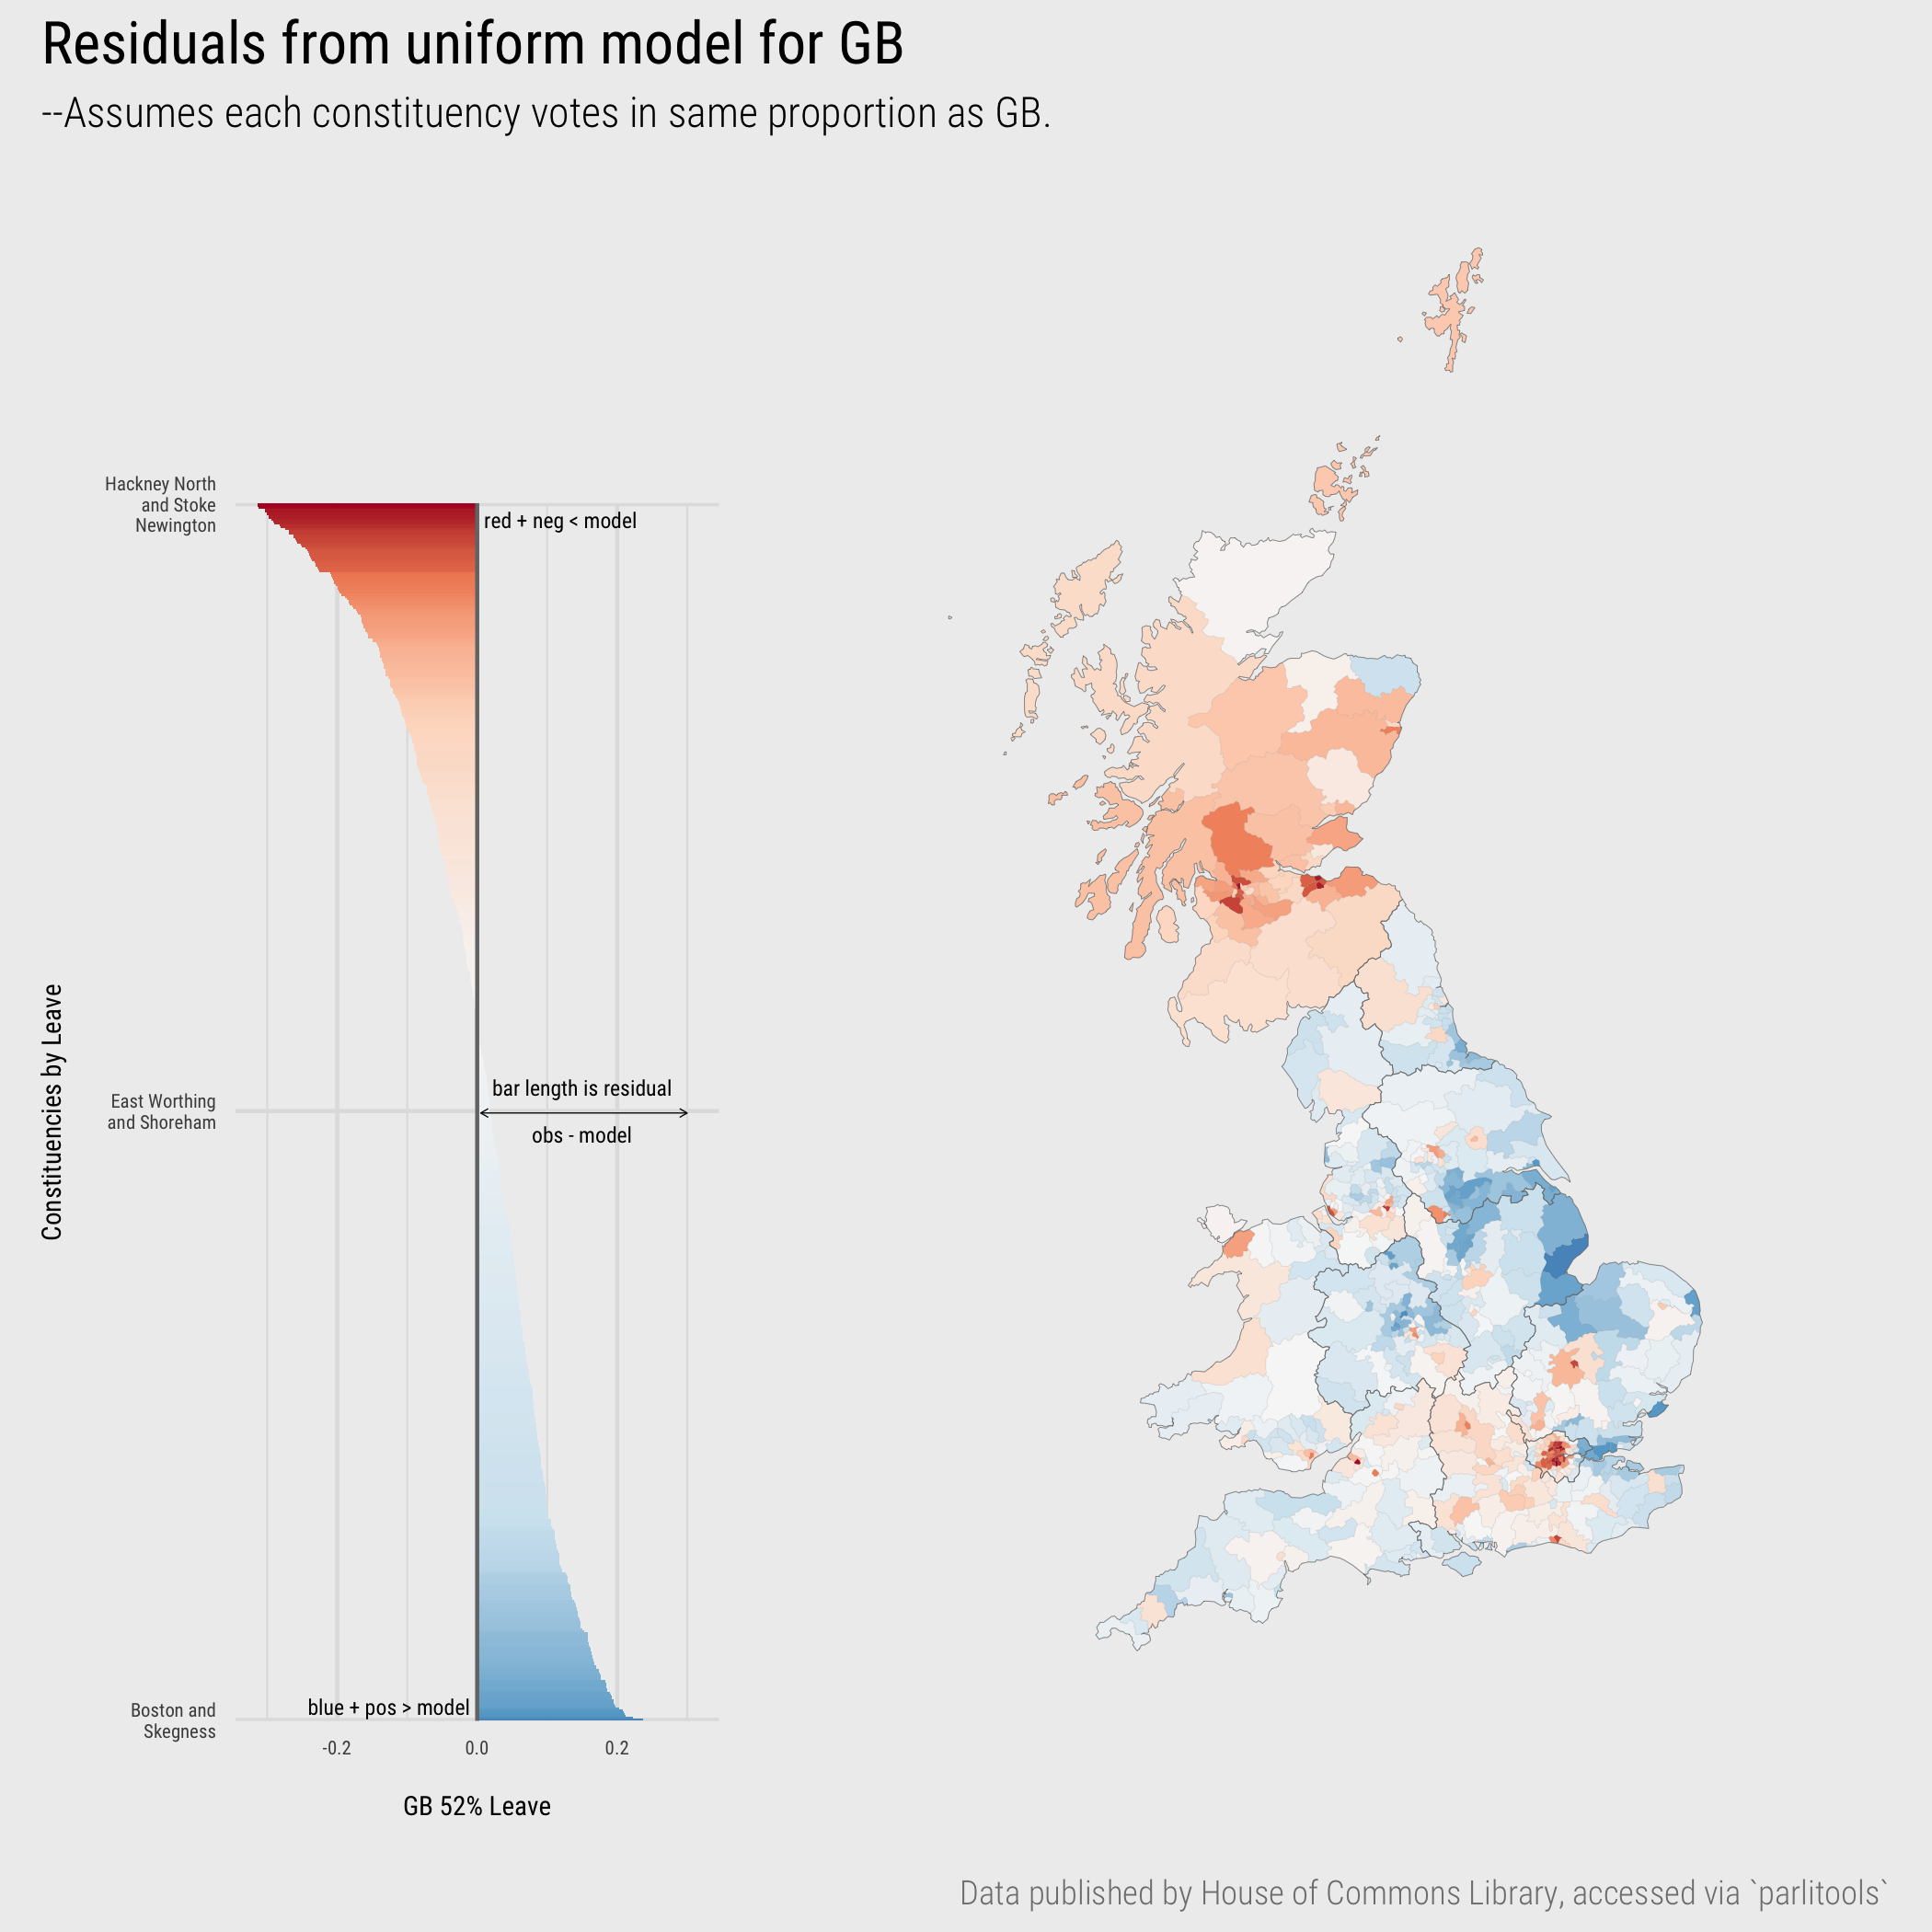 Residuals from uniform model comparing constituency Leave vote to GB average.